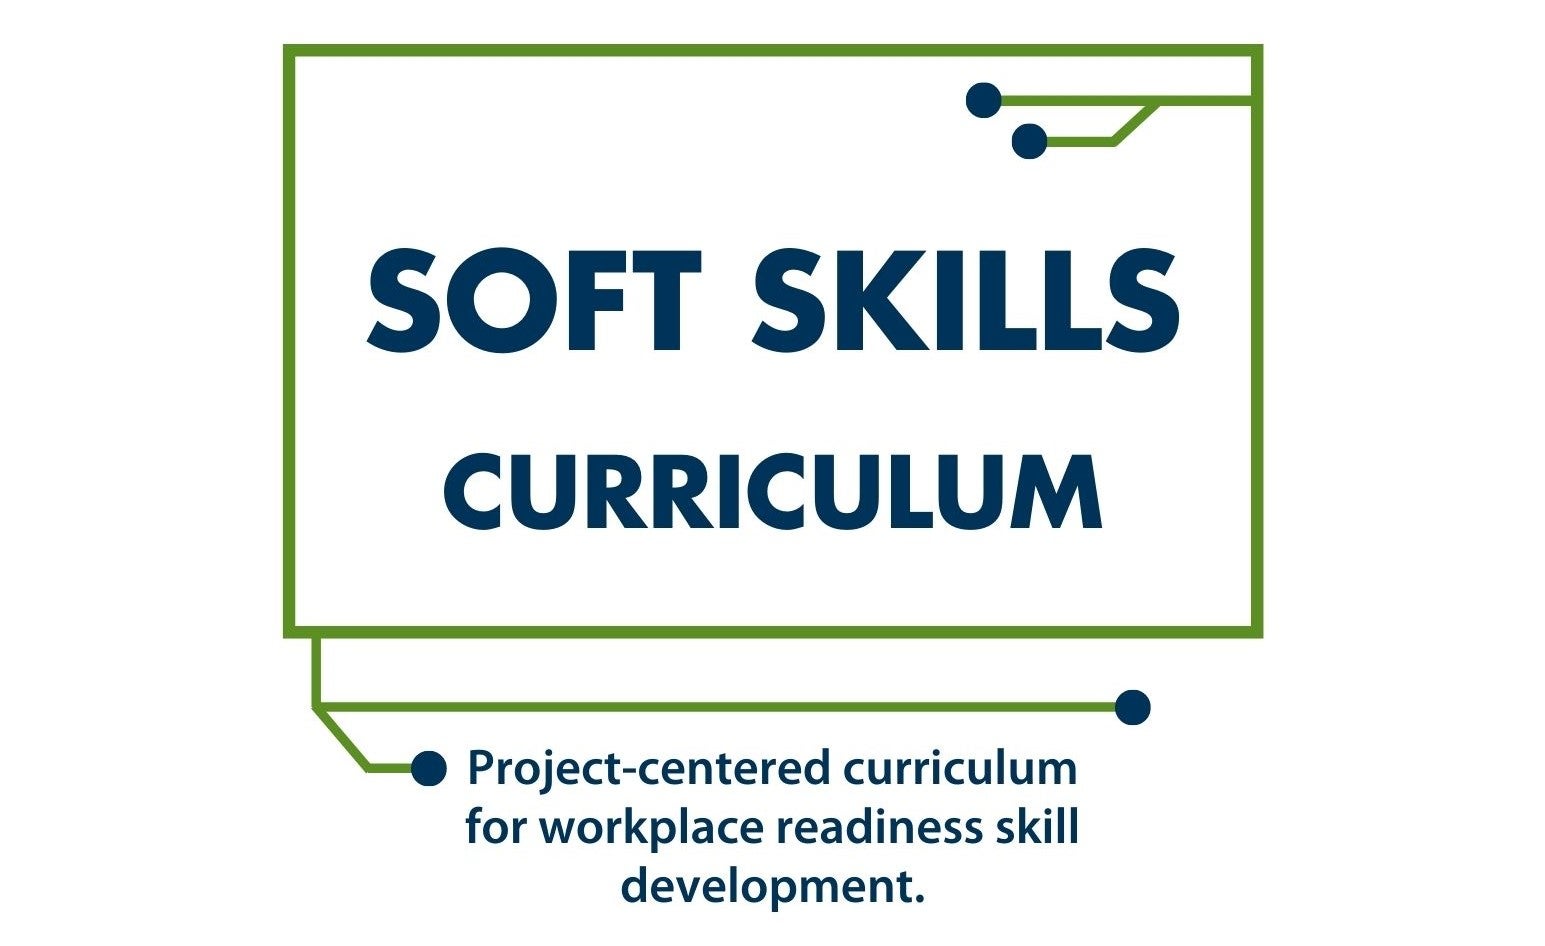 soft skills curriculum image.  Access job skills curriculum including communication, workplace and more.